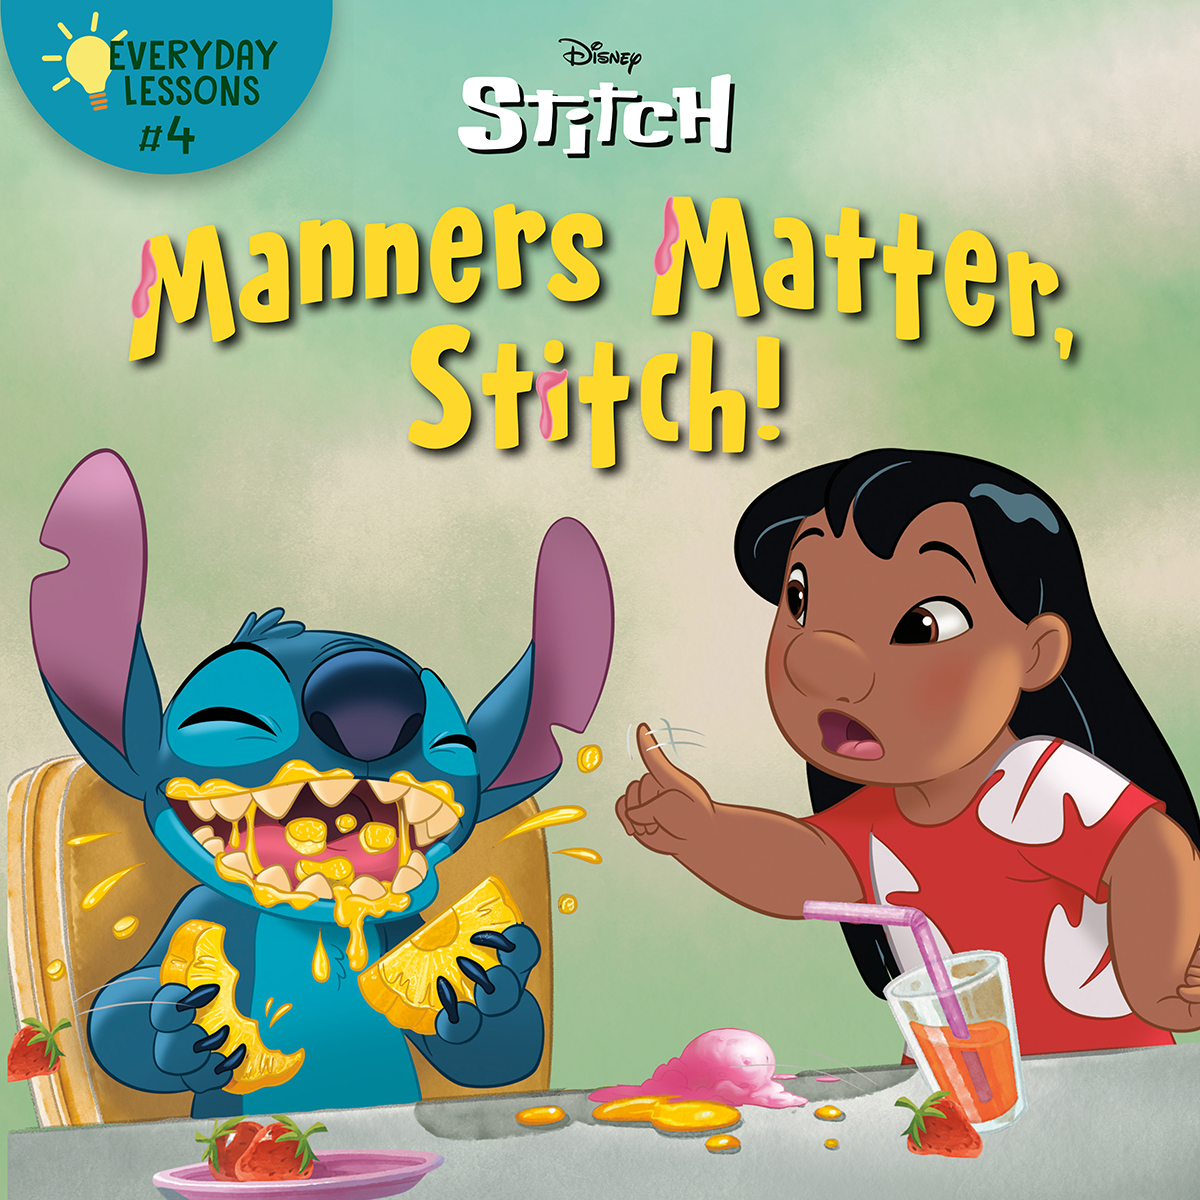  Everyday Lessons #4: Manners Matter, Stitch! 